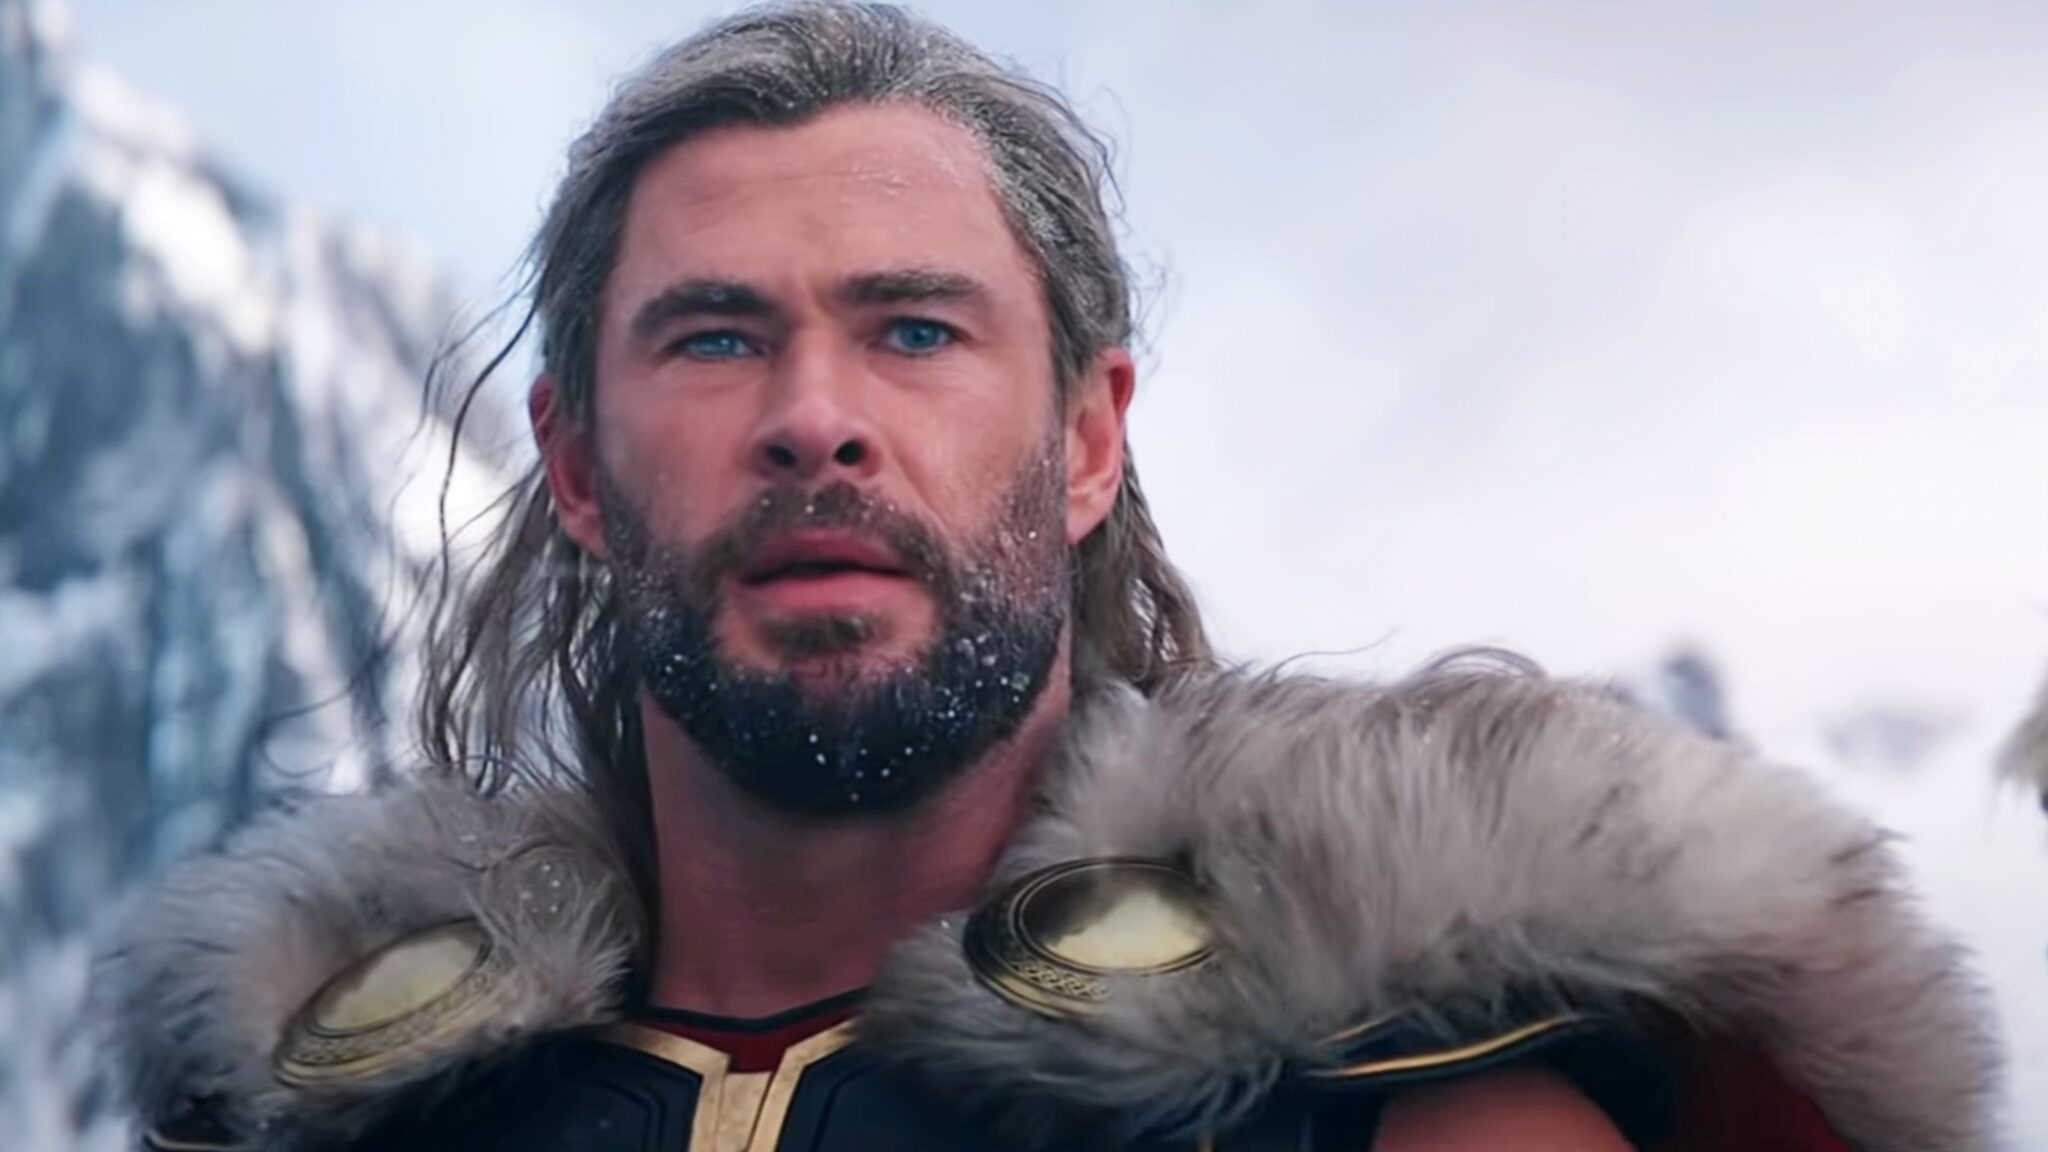 What You Need to Know Before Seeing 'Thor: Love and Thunder' - The Ringer